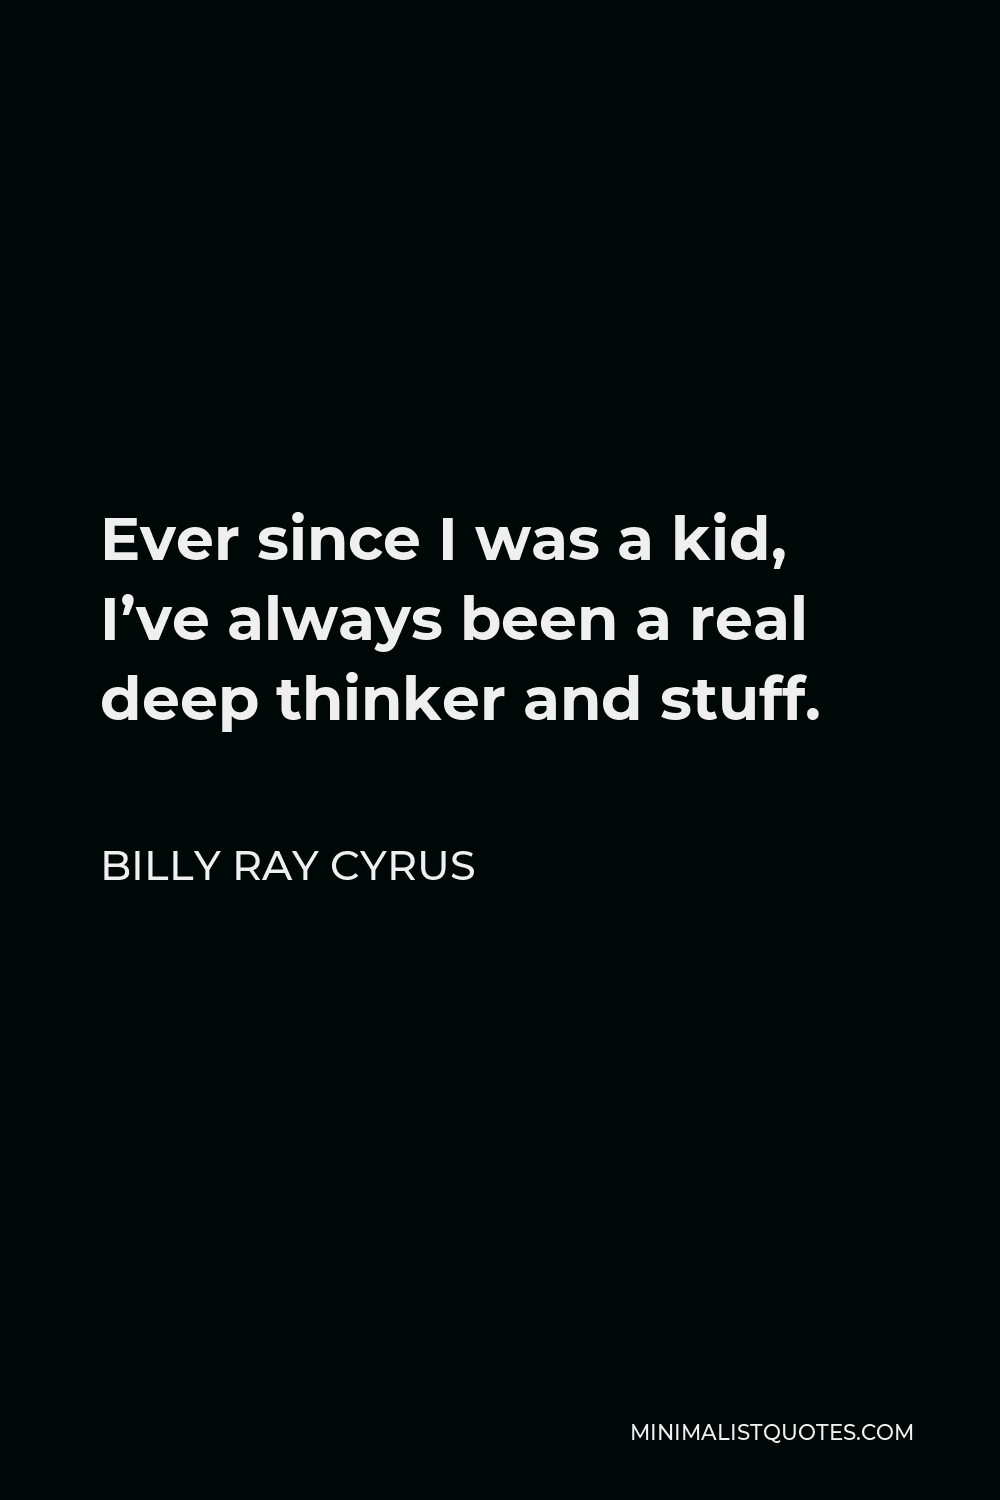 Billy Ray Cyrus Quote - Ever since I was a kid, I’ve always been a real deep thinker and stuff.